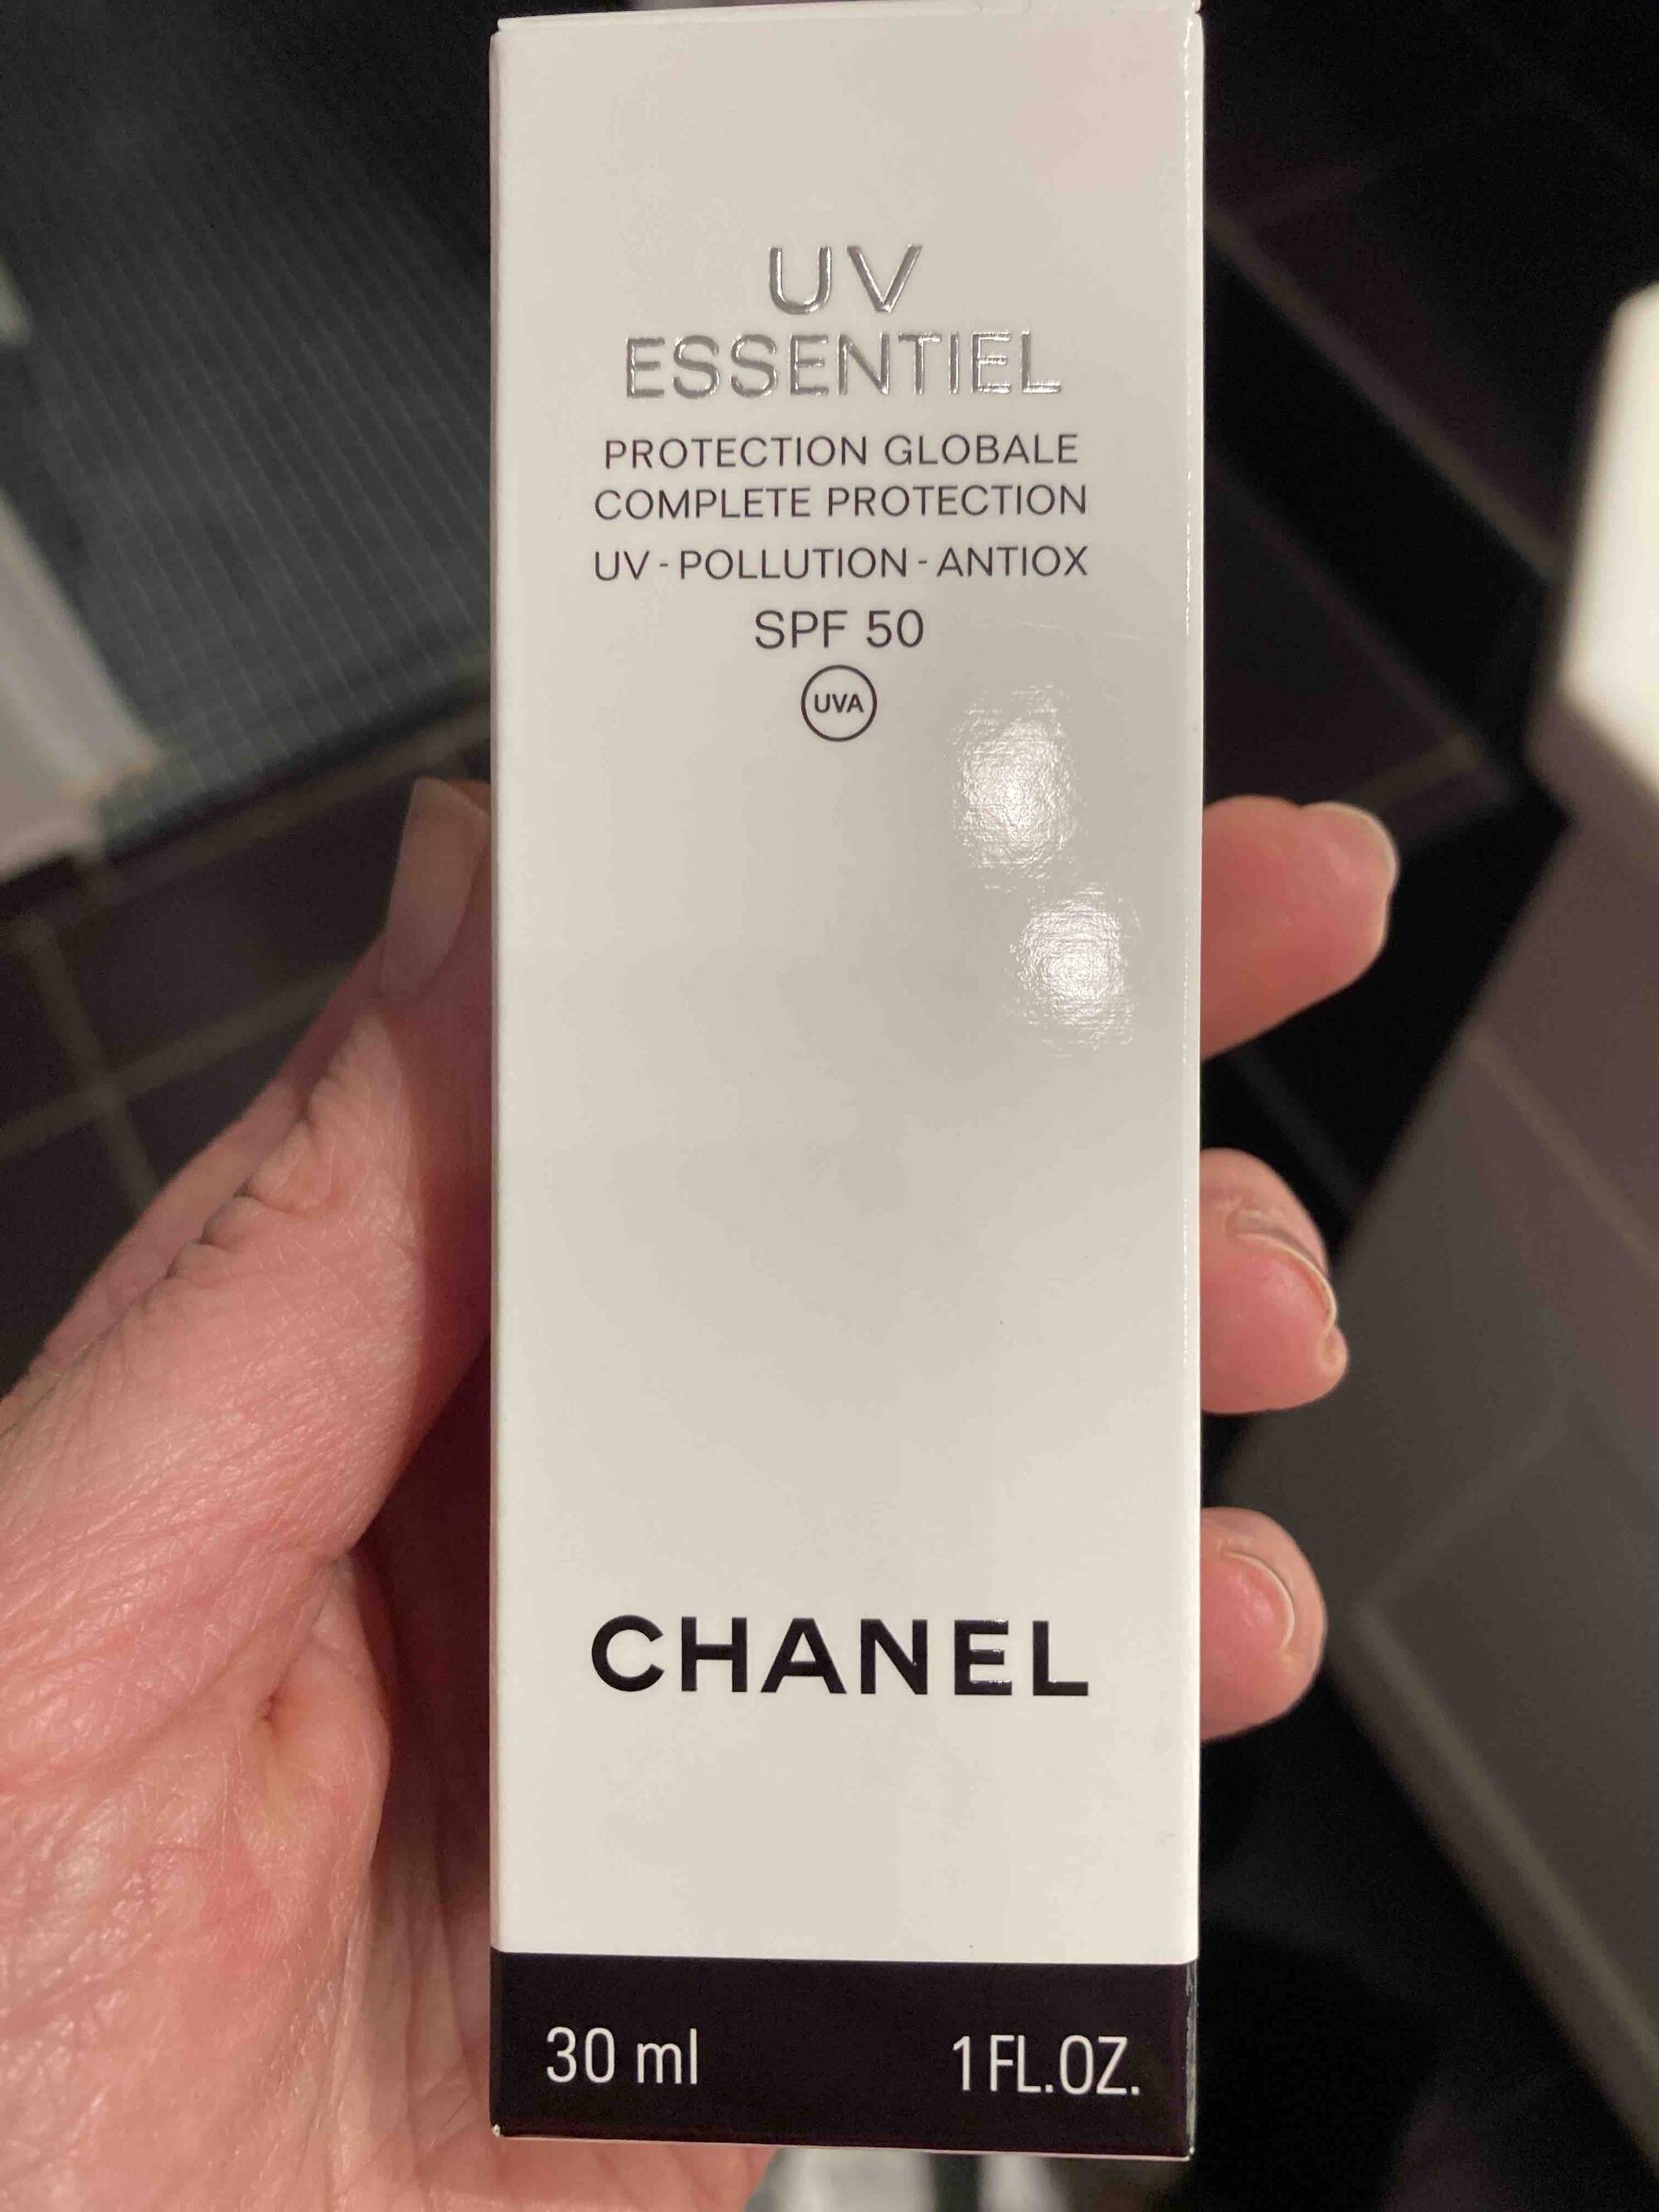 CHANEL - Uv essentiel - Protection globale complète protection SPF 50